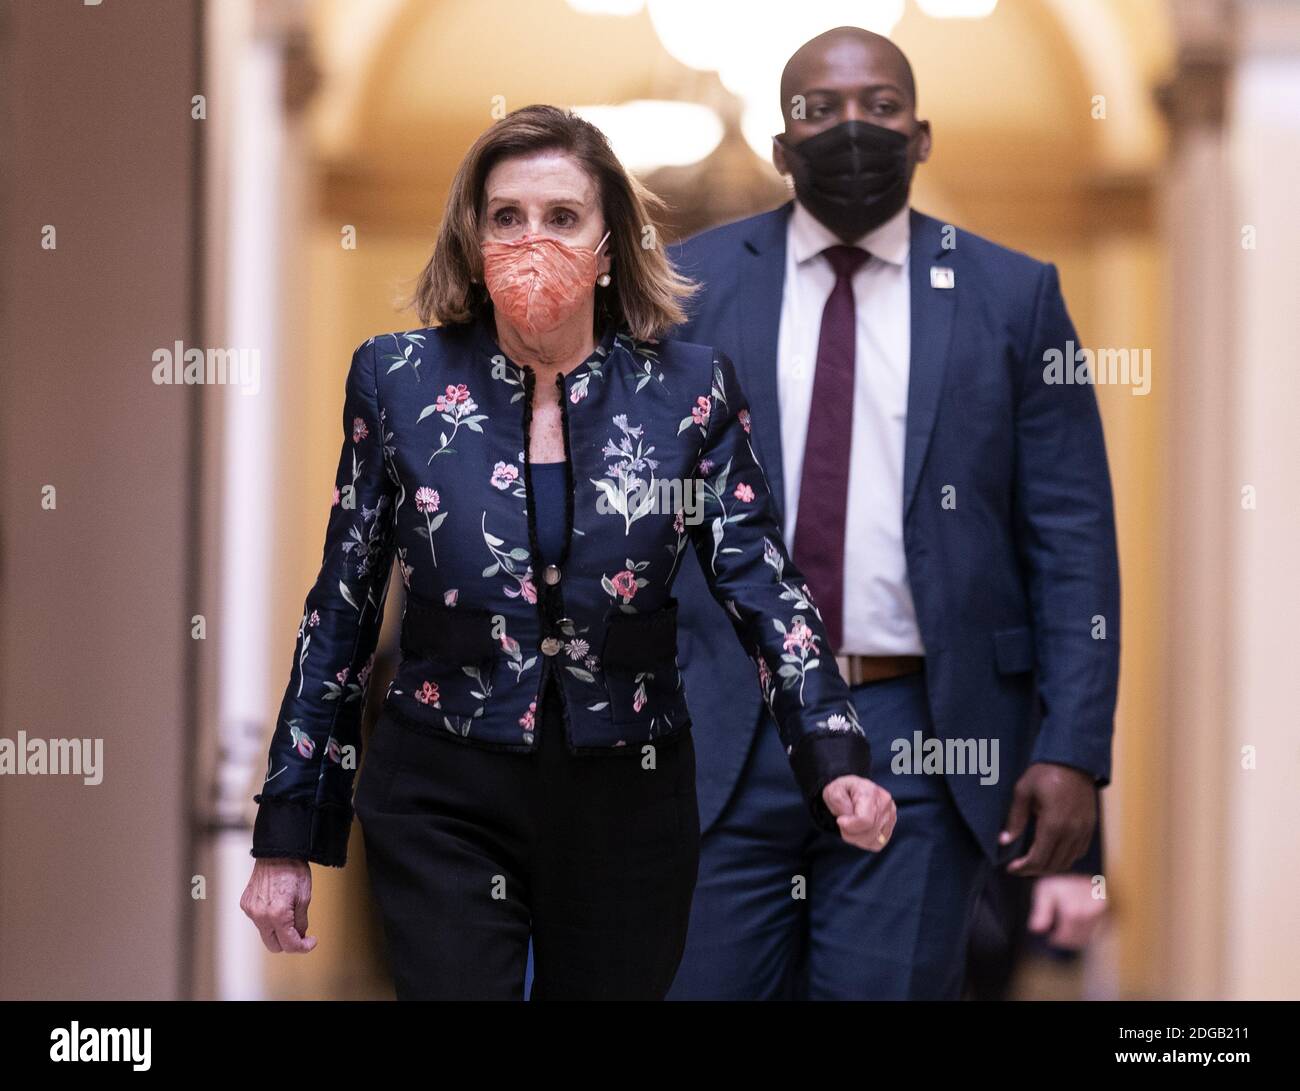 Washington, United States. 08th Dec, 2020. Speaker of the House Nancy Pelosi, D-Calif., leaves the House Chambers as lawmakers continue debate on the next COVID-19 stimulus package, at the U.S. Capitol in Washington, DC on Tuesday, December 8, 2020. Photo by Kevin Dietsch/UPI Credit: UPI/Alamy Live News Stock Photo